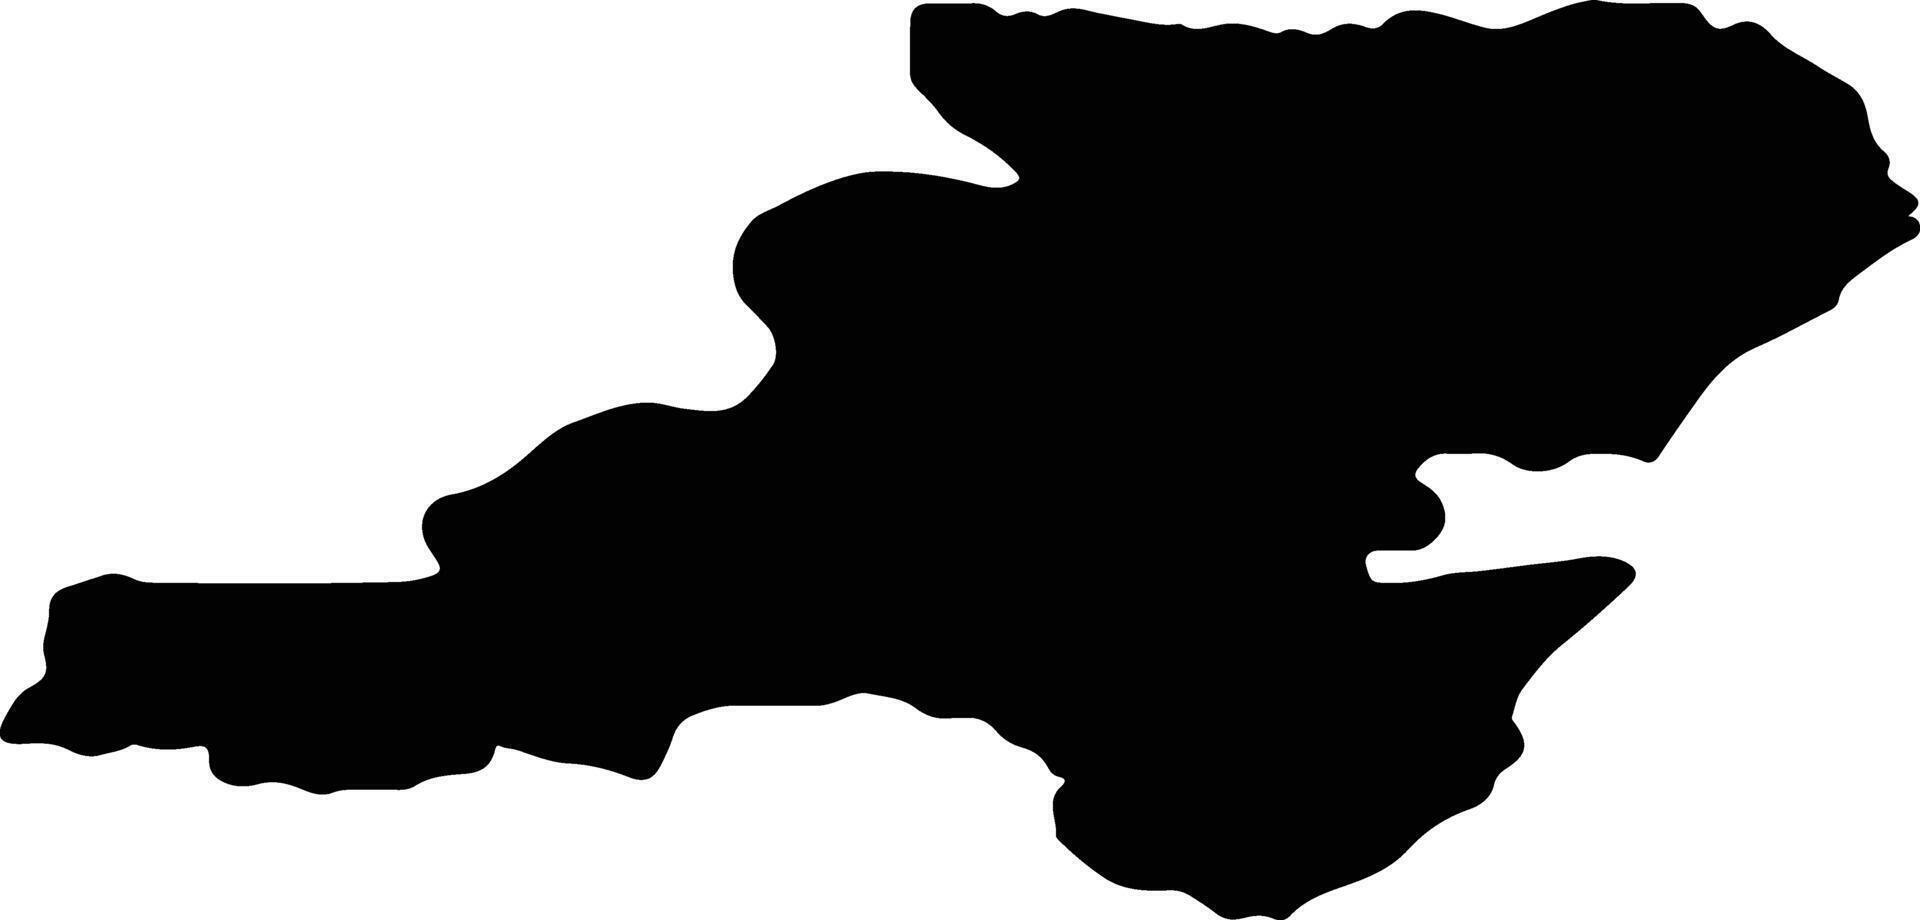 Aberdeenshire United Kingdom silhouette map vector